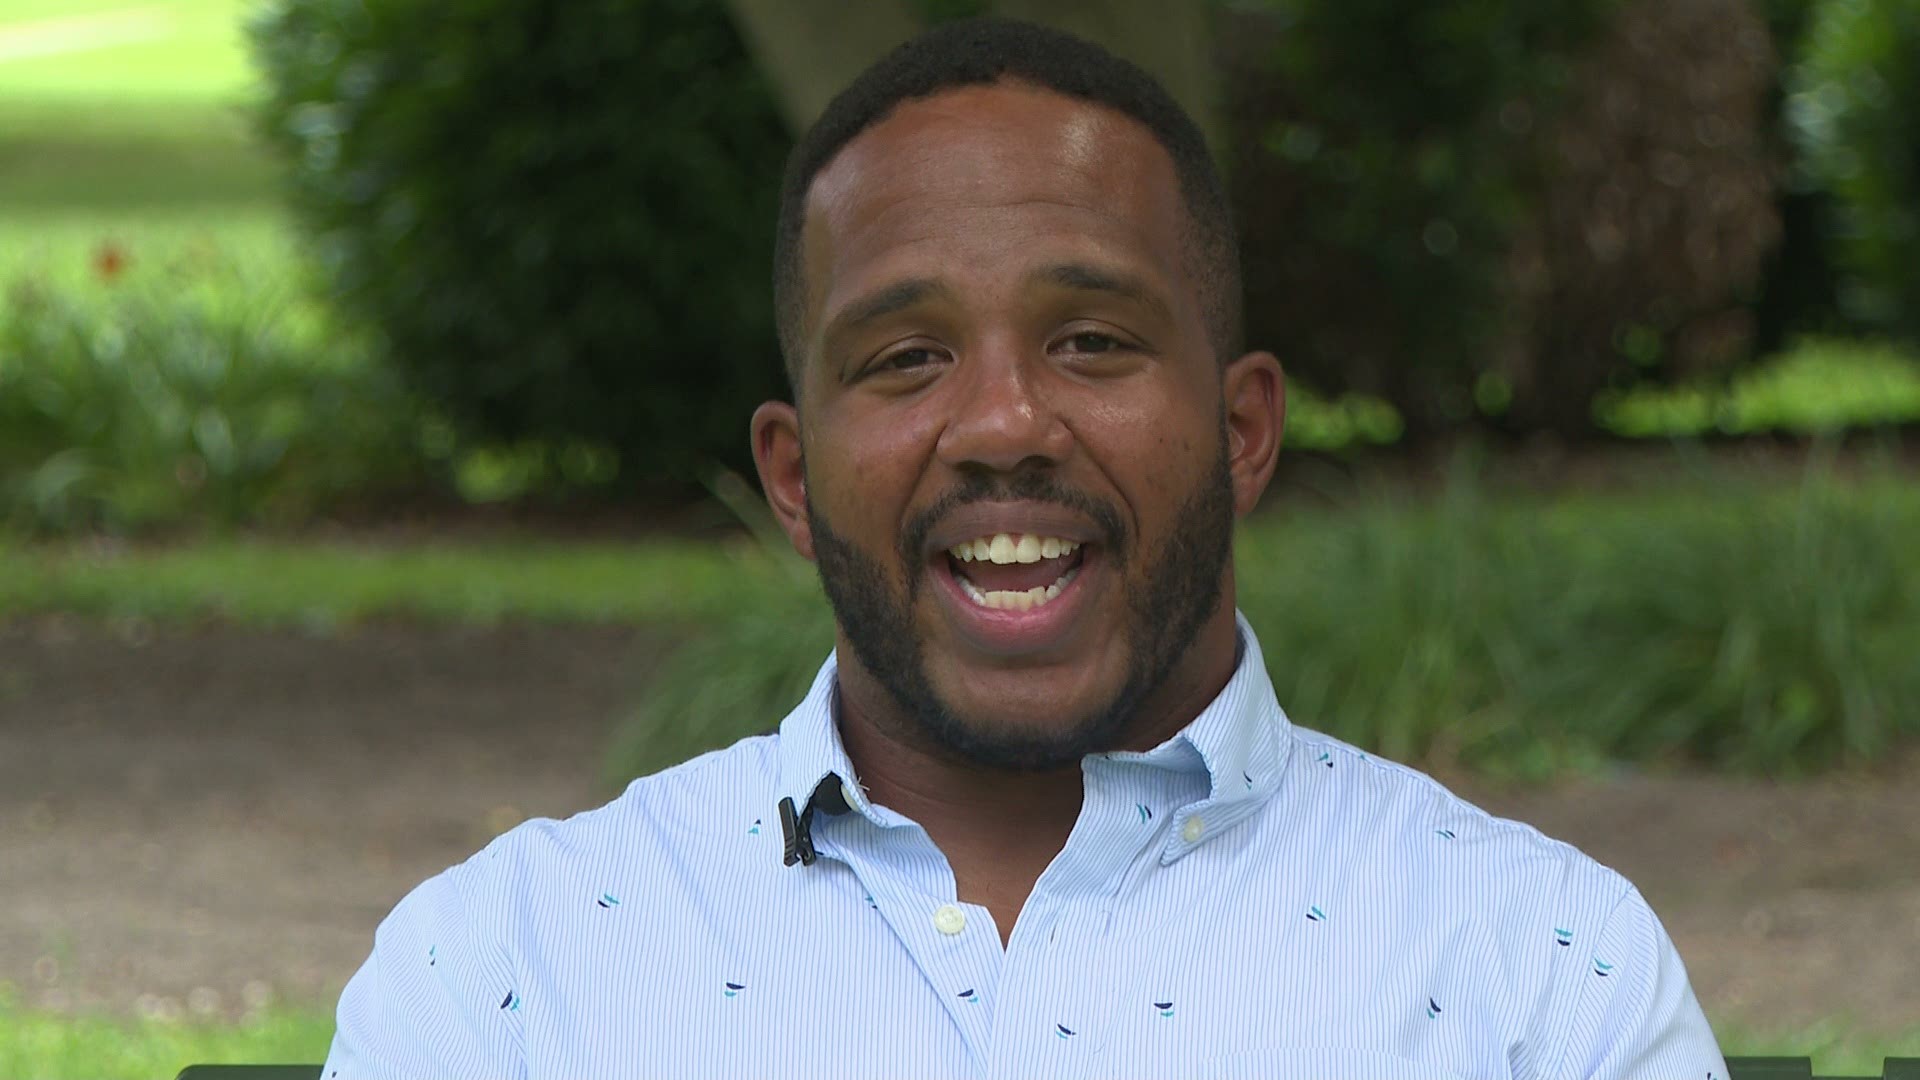 Louisville native and social justice advocate, Torrence Williams, says he is pushing for racial equity in all phases of society.